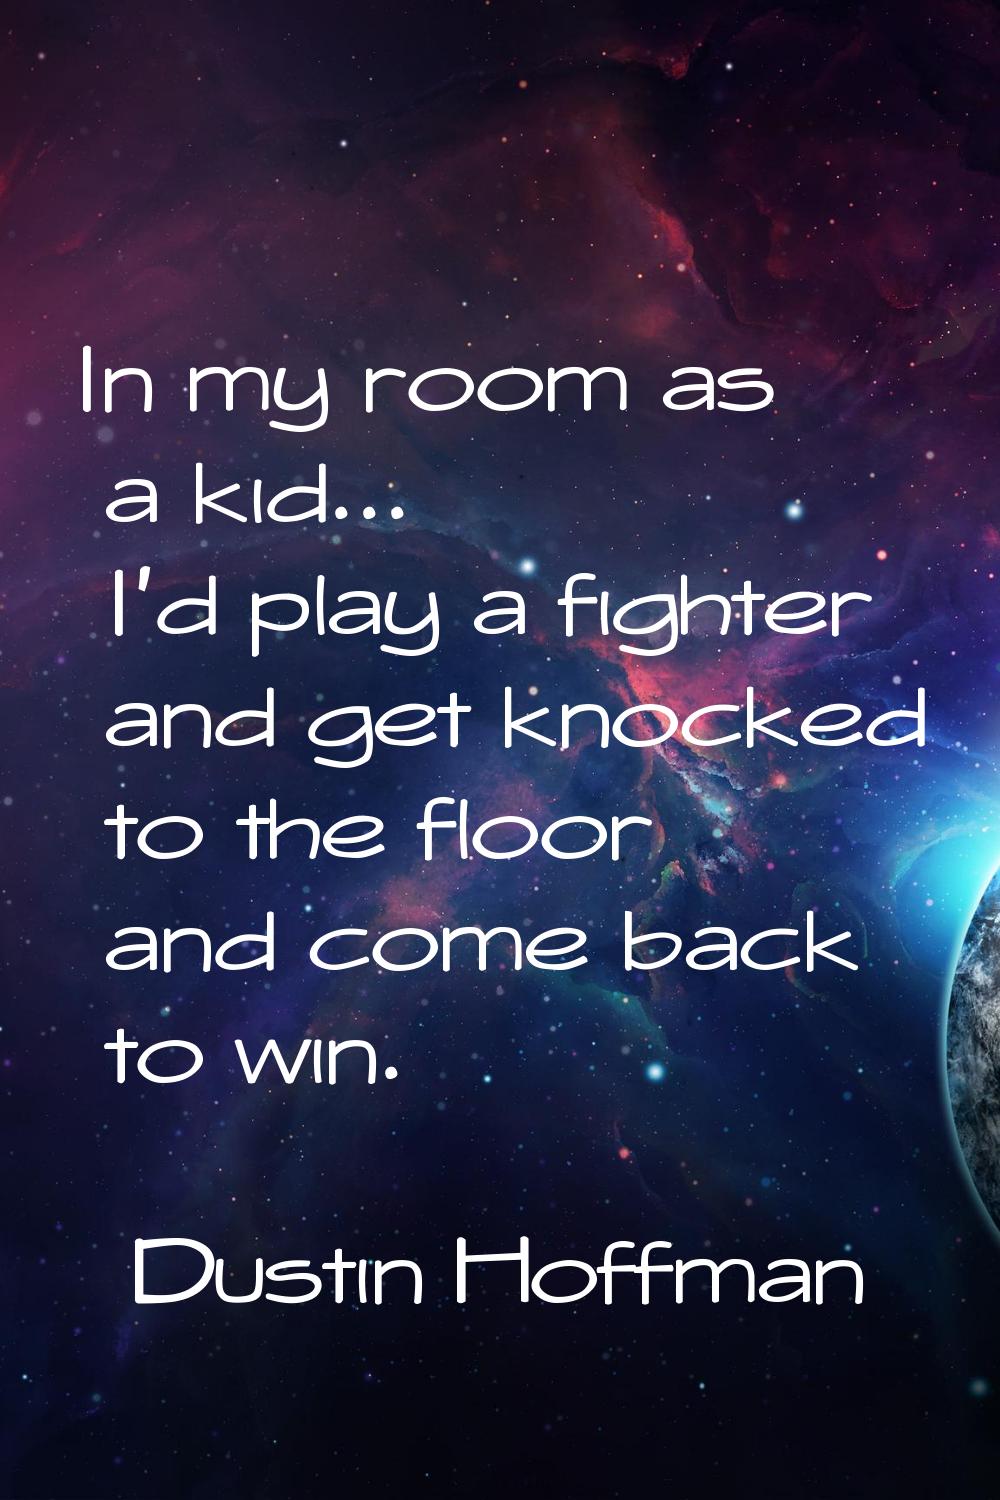 In my room as a kid... I'd play a fighter and get knocked to the floor and come back to win.